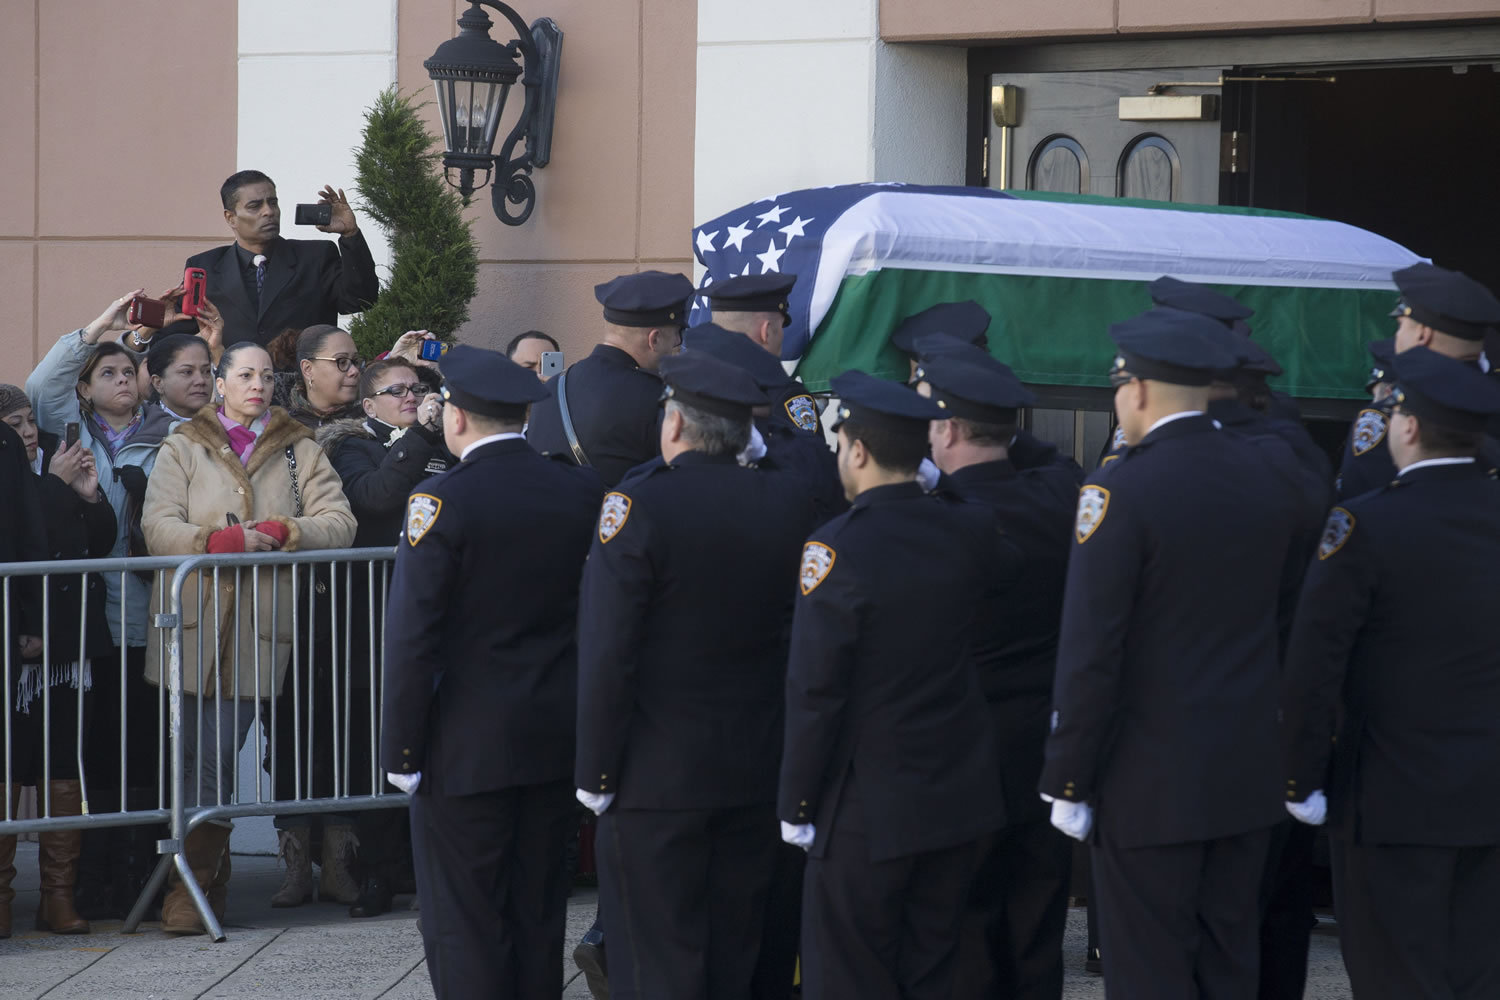 The casket of New York Police Department Officer Rafael Ramos arrives Friday to his wake at Christ Tabernacle Church in the Glendale section of Queens, where he was member, in New York. Ramos was killed Dec. 20 along with his partner, Officer Wenjian Liu, as they sat in their patrol car on a Brooklyn street. The shooter, Ismaaiyl Brinsley, later killed himself.